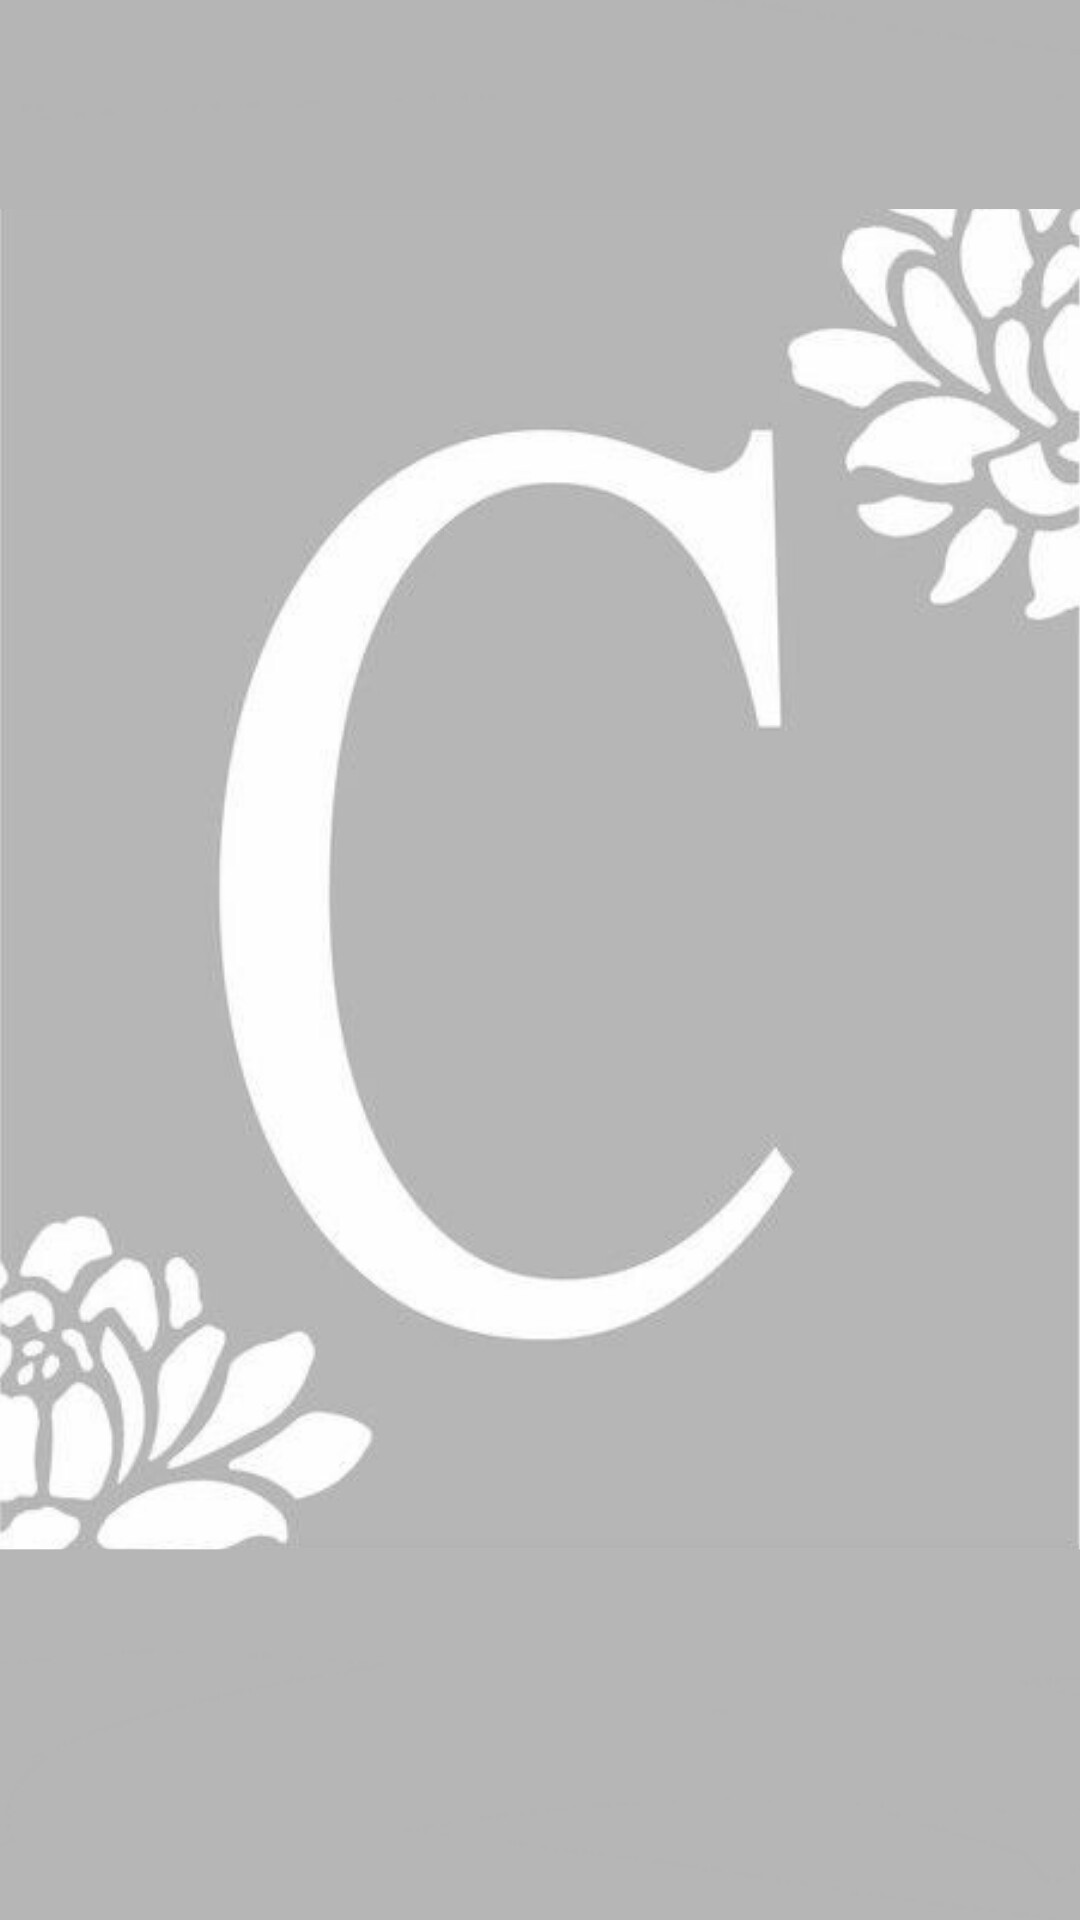 1080x1920 Find this Pin and more on "C" Monograms Wallpaper for Caroline by  HisFancyFace.